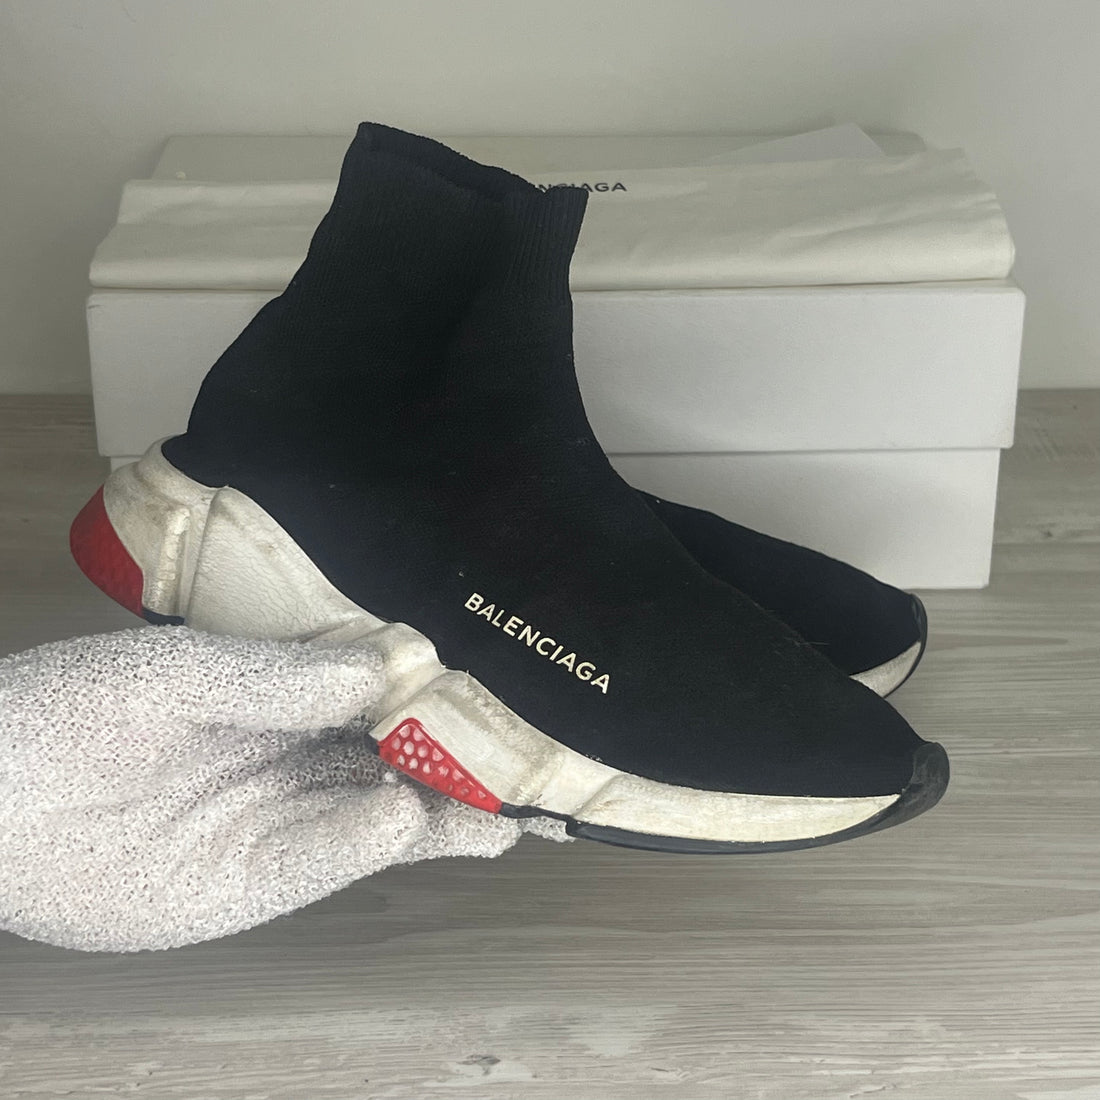 Balenciaga Sneakers, Speed Trainers (39)